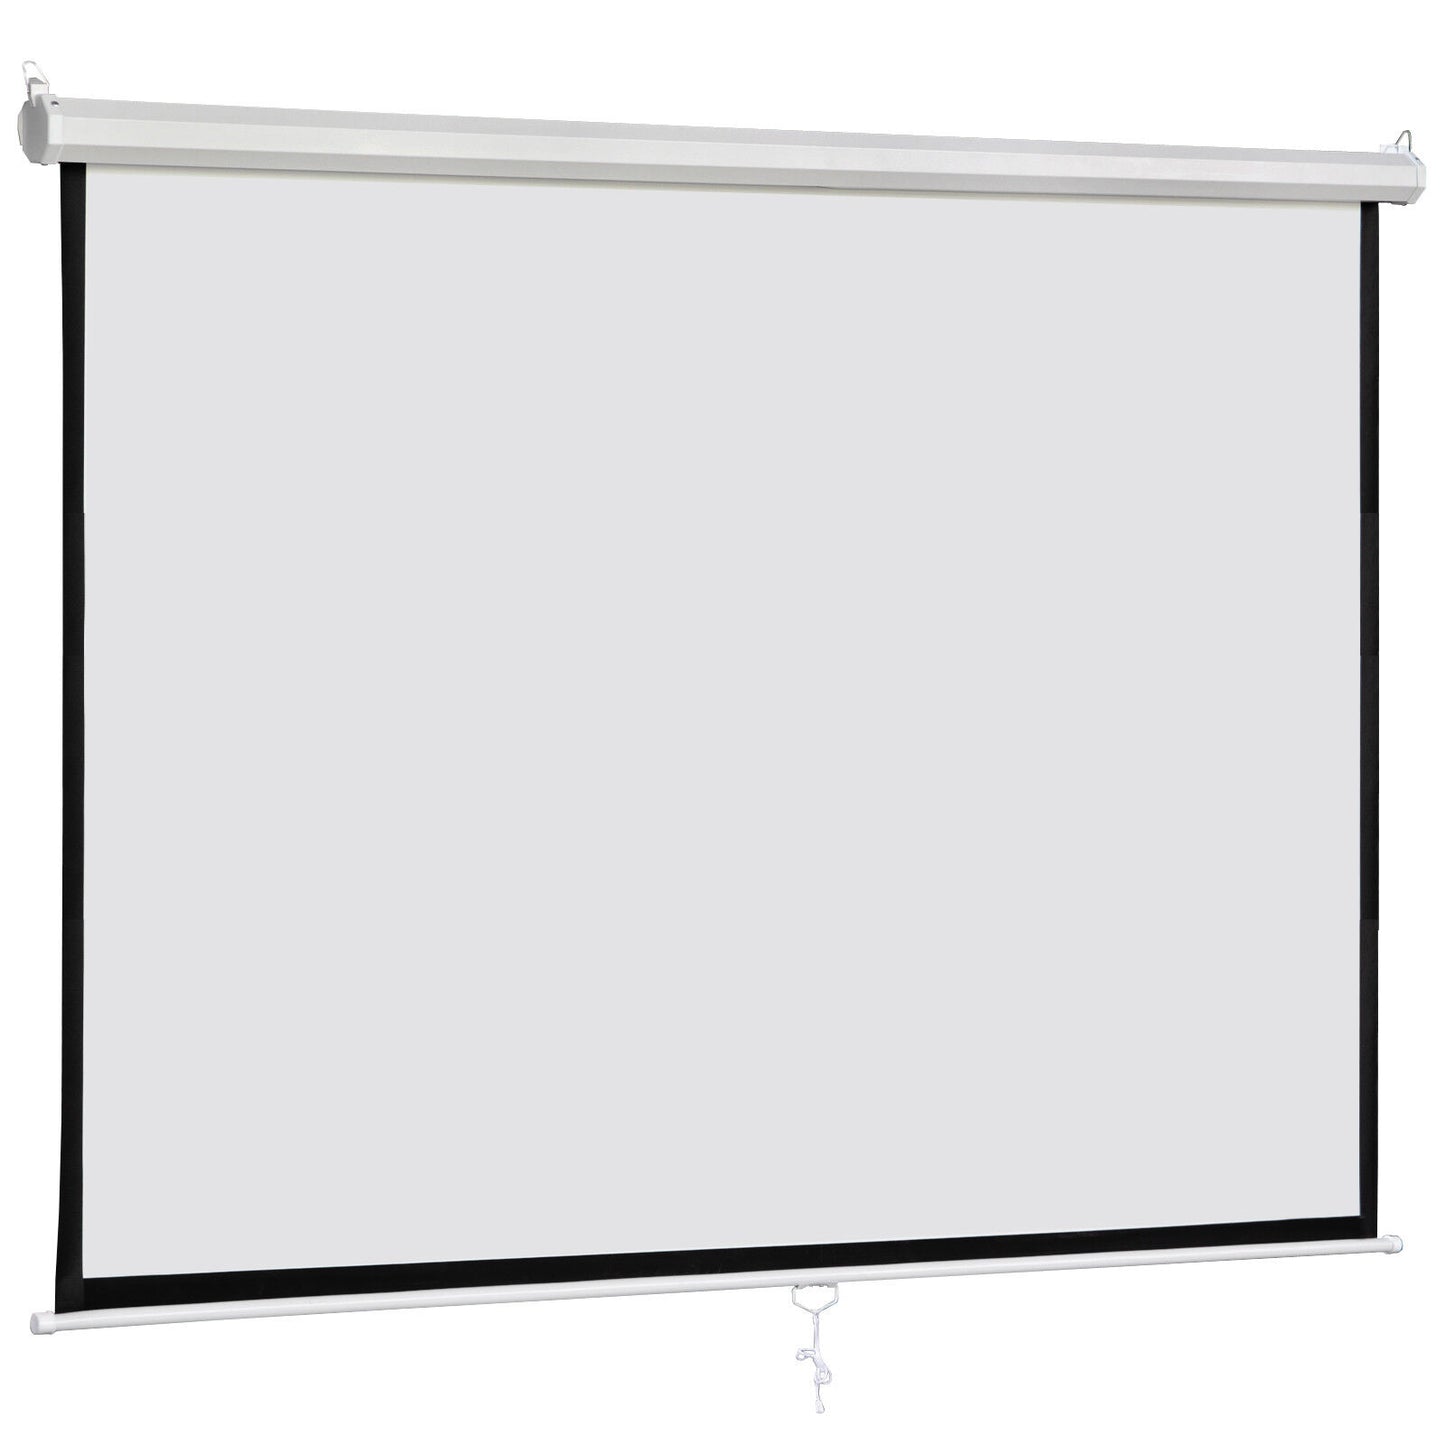 84" X 84" Diagonal Dimension Pull Down Projection Screen Matte HD Movie Theater